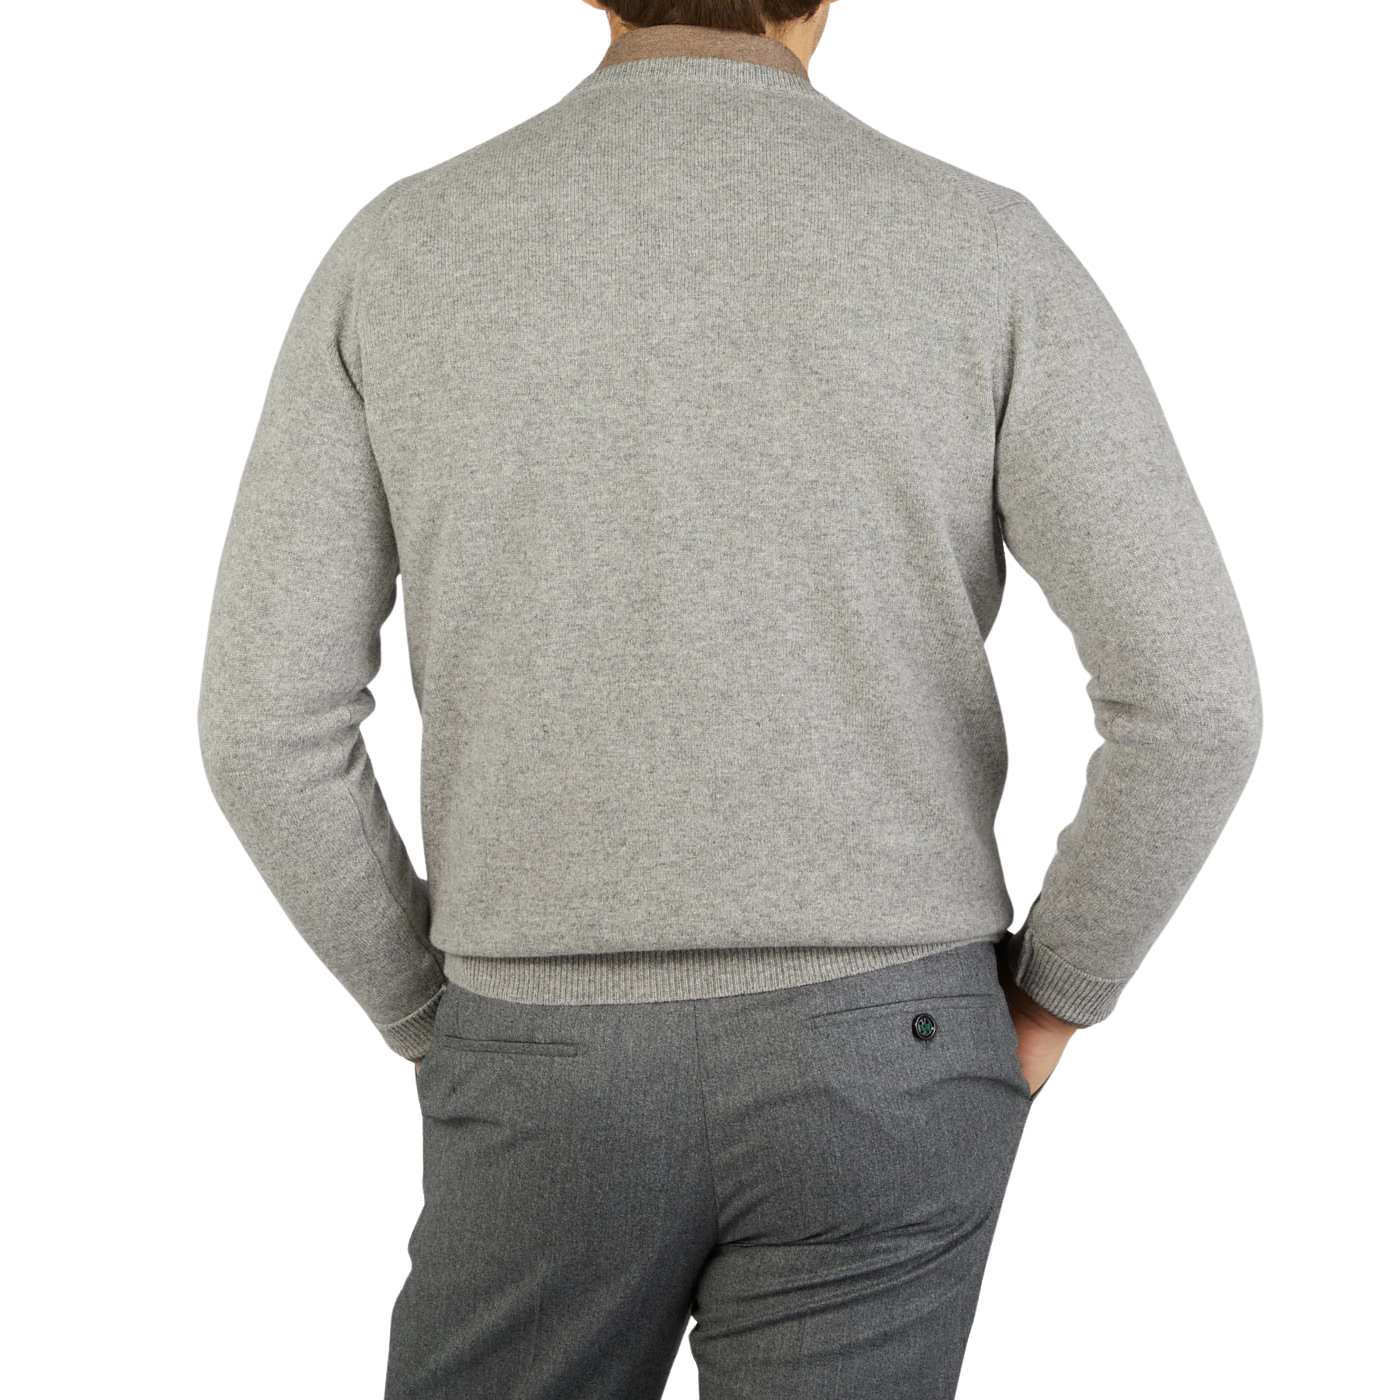 The back view of a man wearing a William Lockie Flannel Grey V-Neck Lambswool Sweater and pants.